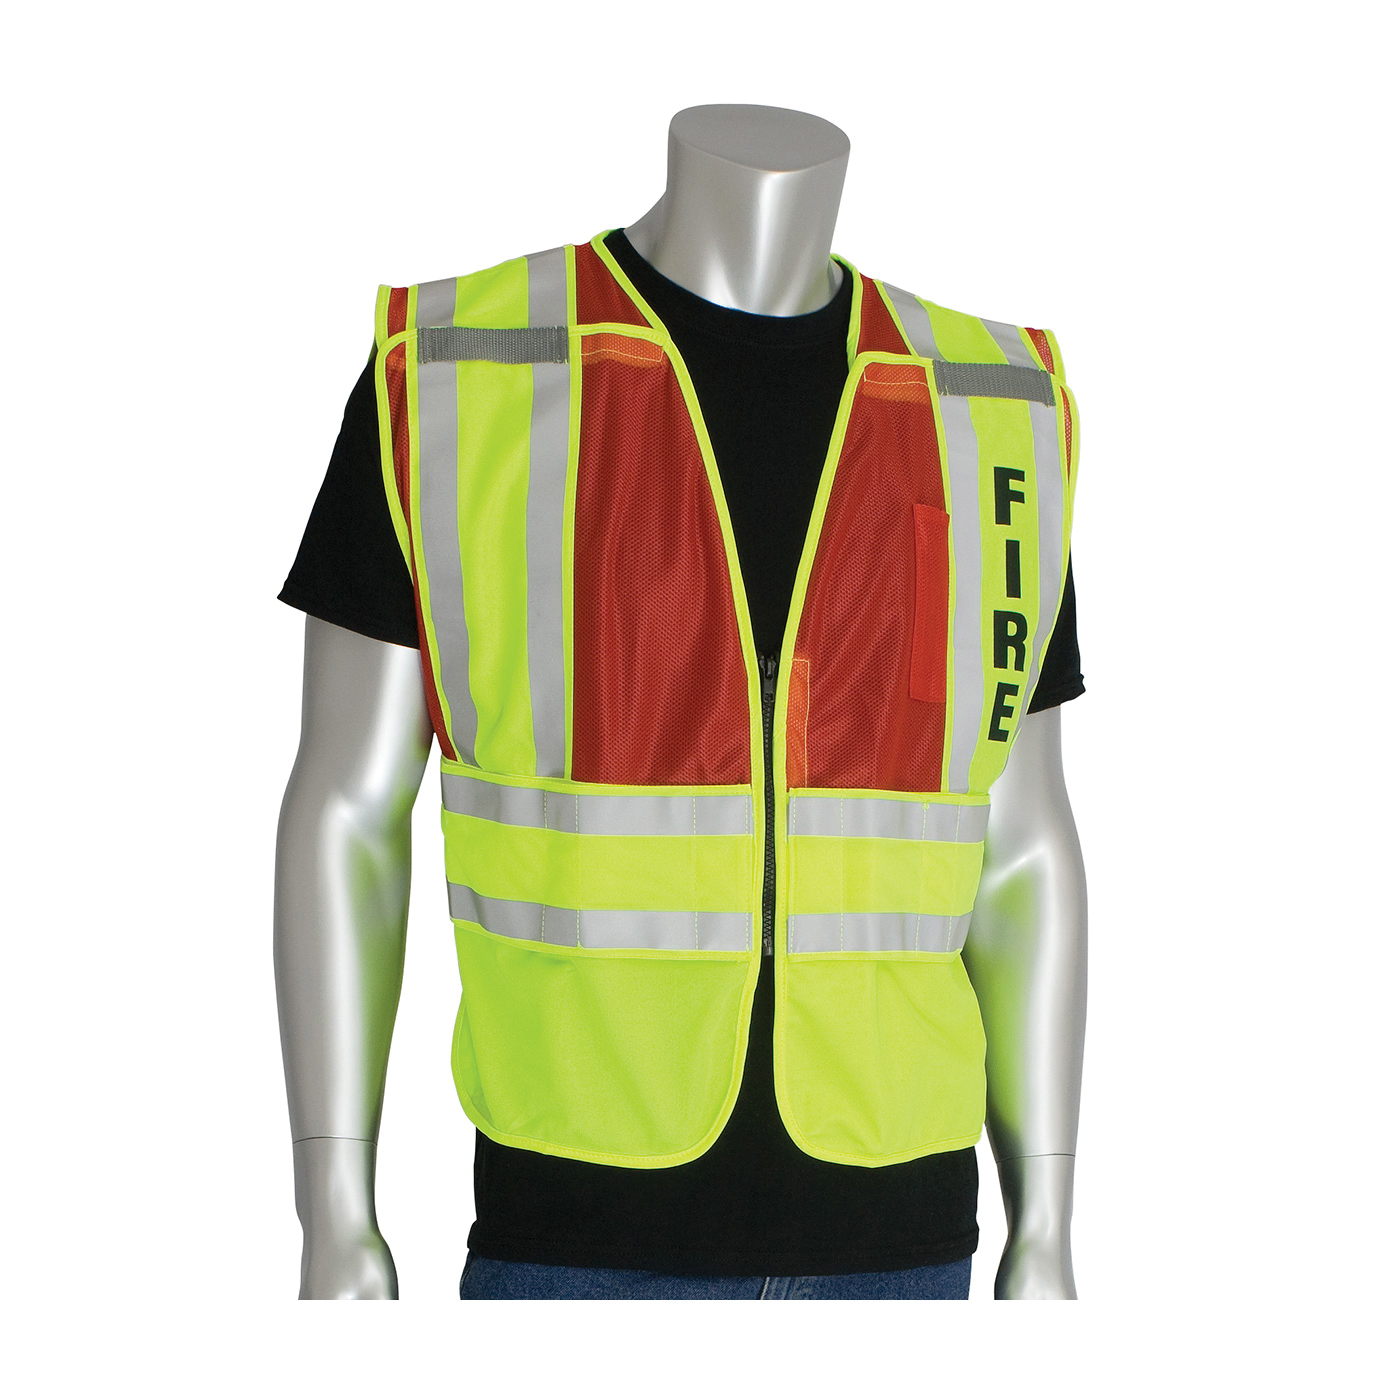 PIP® 302-PSV-RED-M/XL Public Safety Vest With FIRE Logo, M/XL, Hi-Viz Lime Yellow/Red, Polyester, Zipper Closure, 2 Pockets, ANSI Class: Class 2, Specifications Met: ANSI 107 Type P